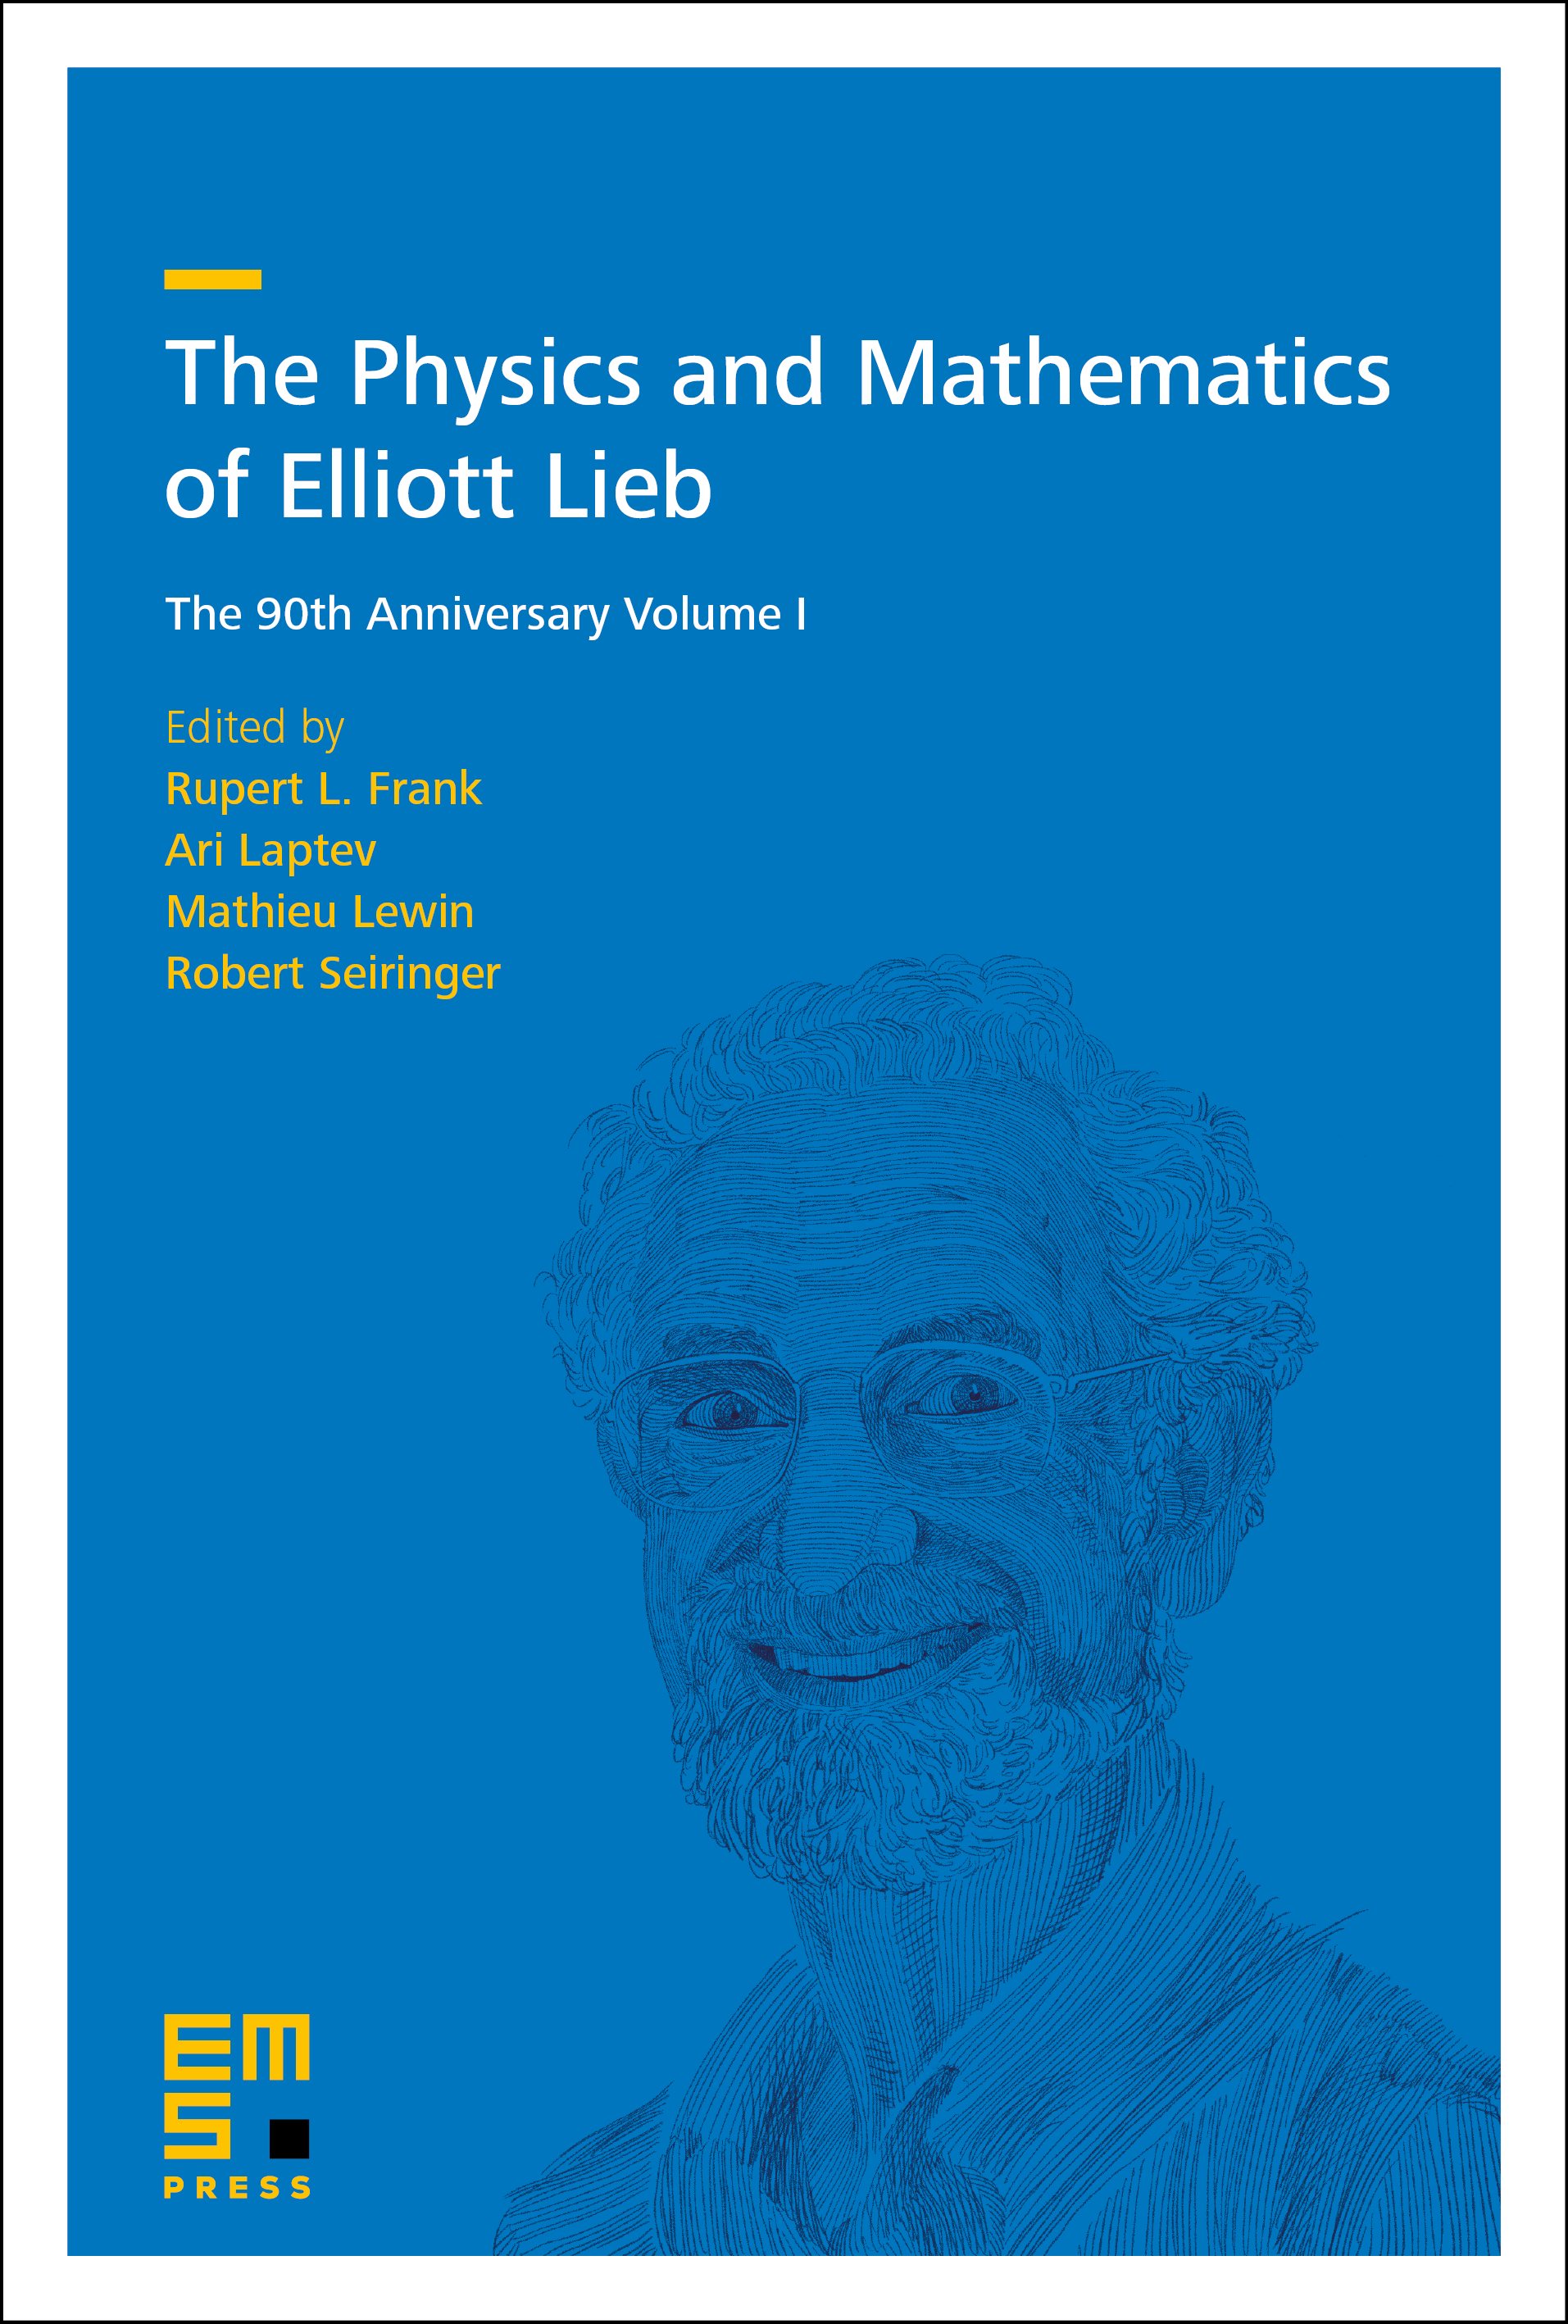 Lieb’s most useful contribution to density functional theory? cover